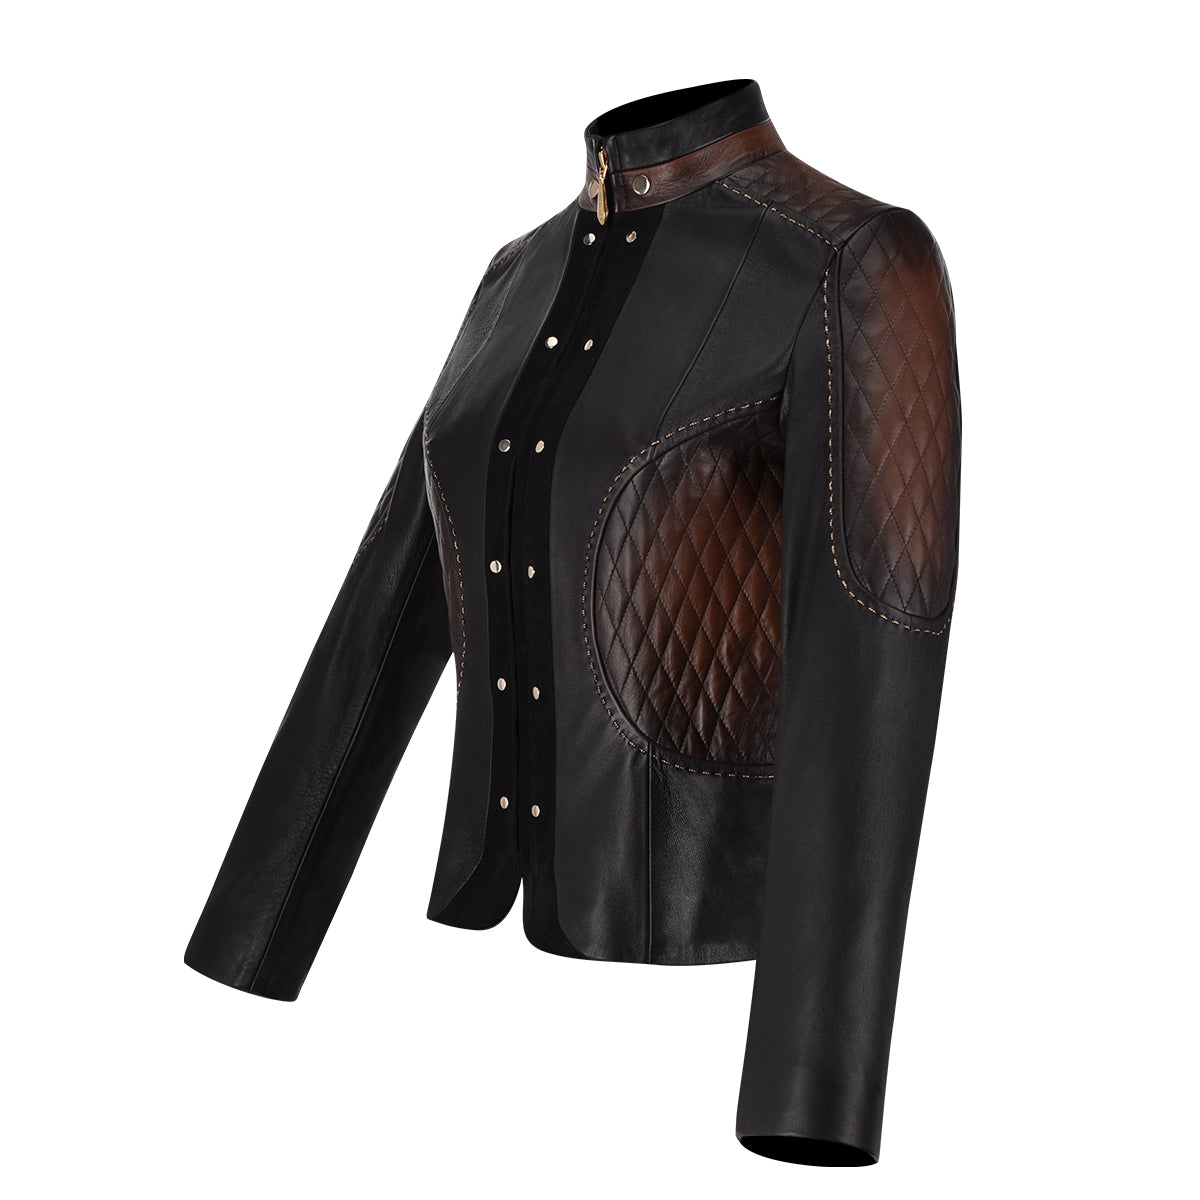 Womens black leather short jacket, Shearling jacket for women. Embroidered with geometric motifs on the front and on the sides. 